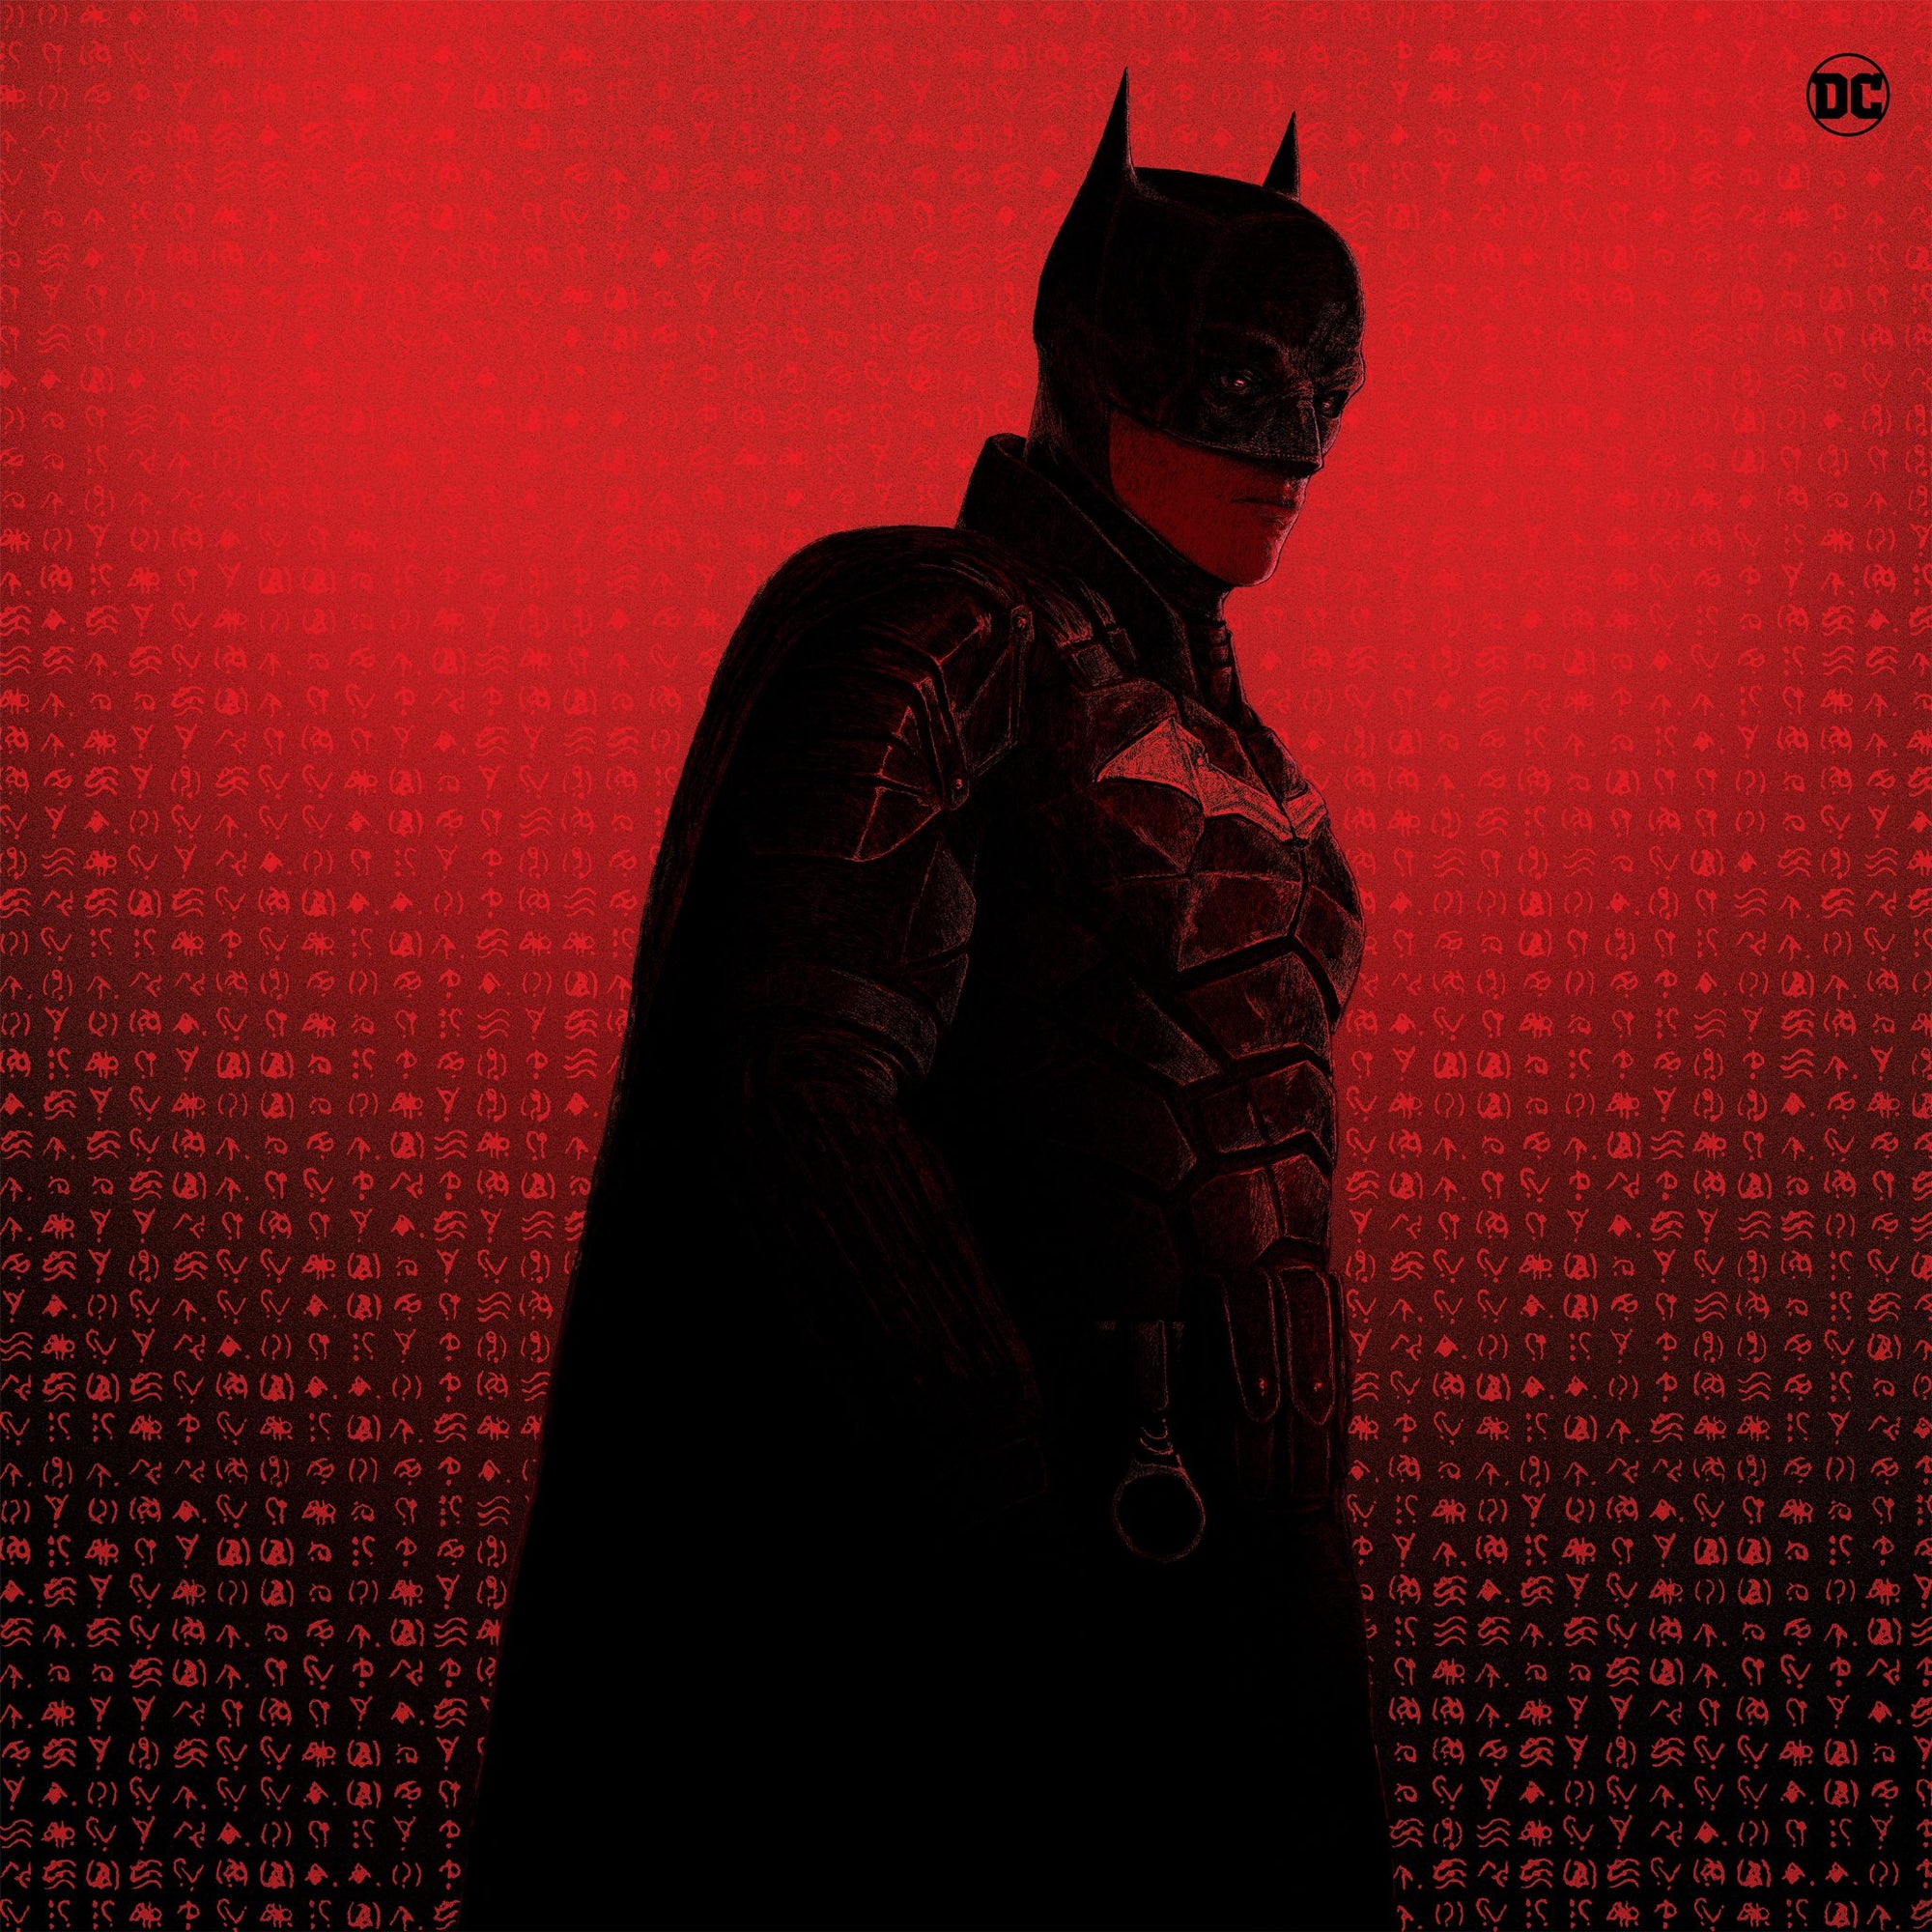 Here's some Batman wallpapers I made for IOS 16 : r/TheBatmanFilm